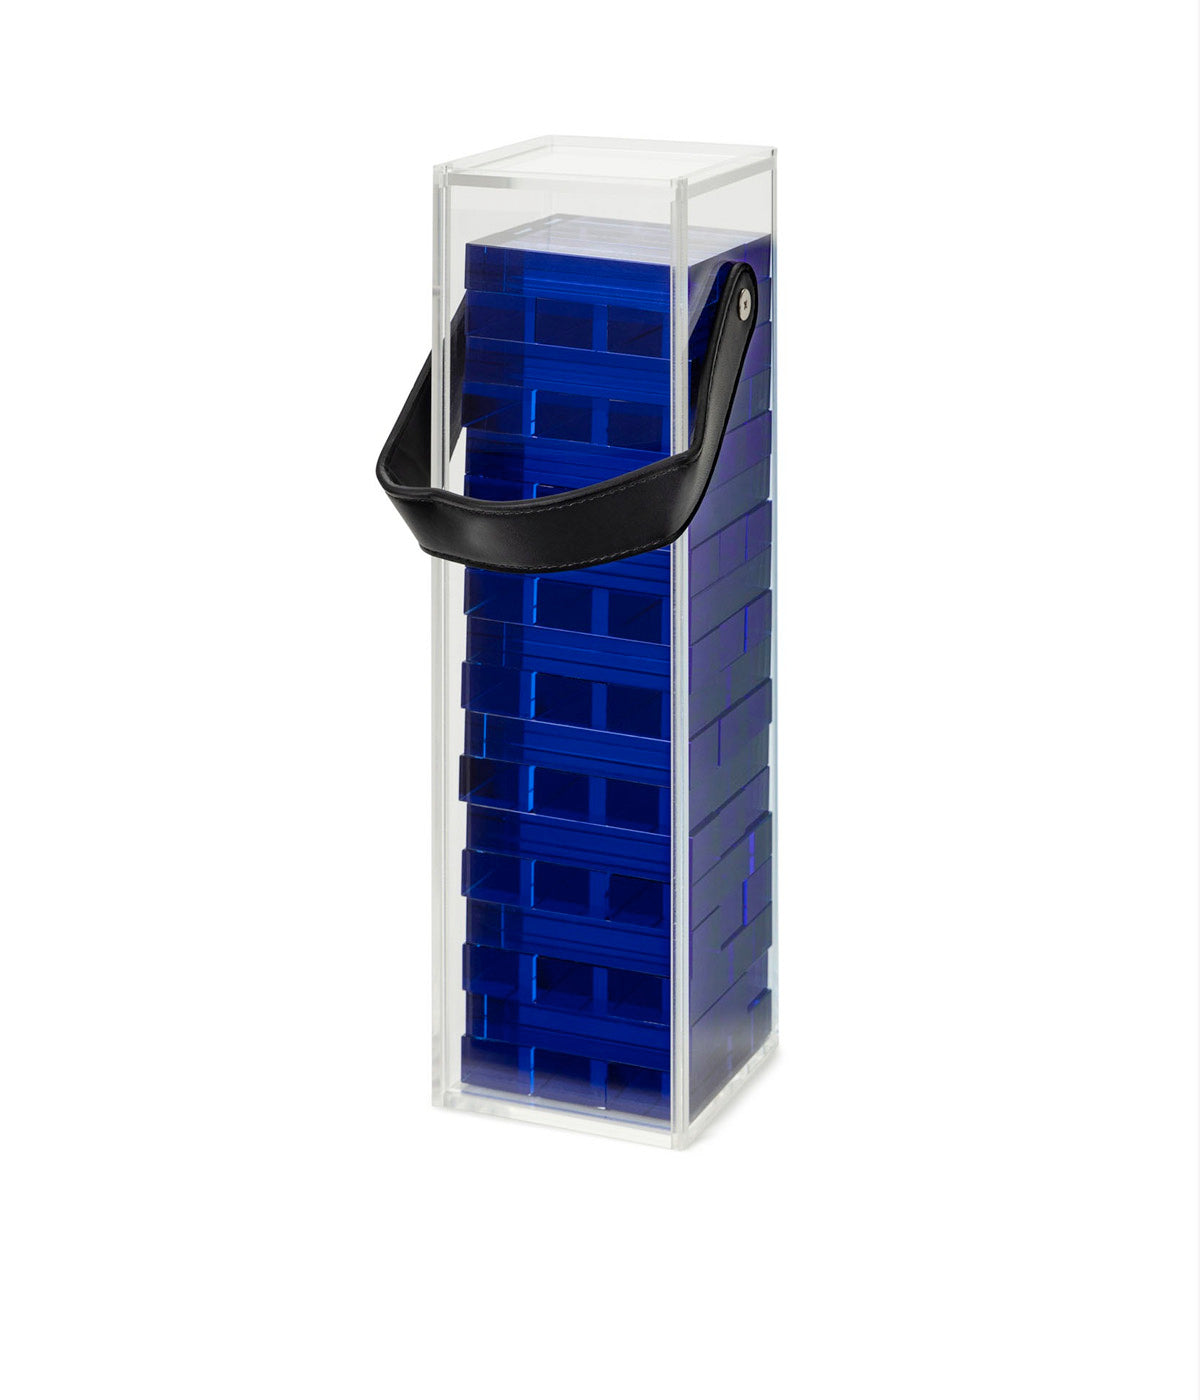 Acrylic Tumbler Tower Set in Blue